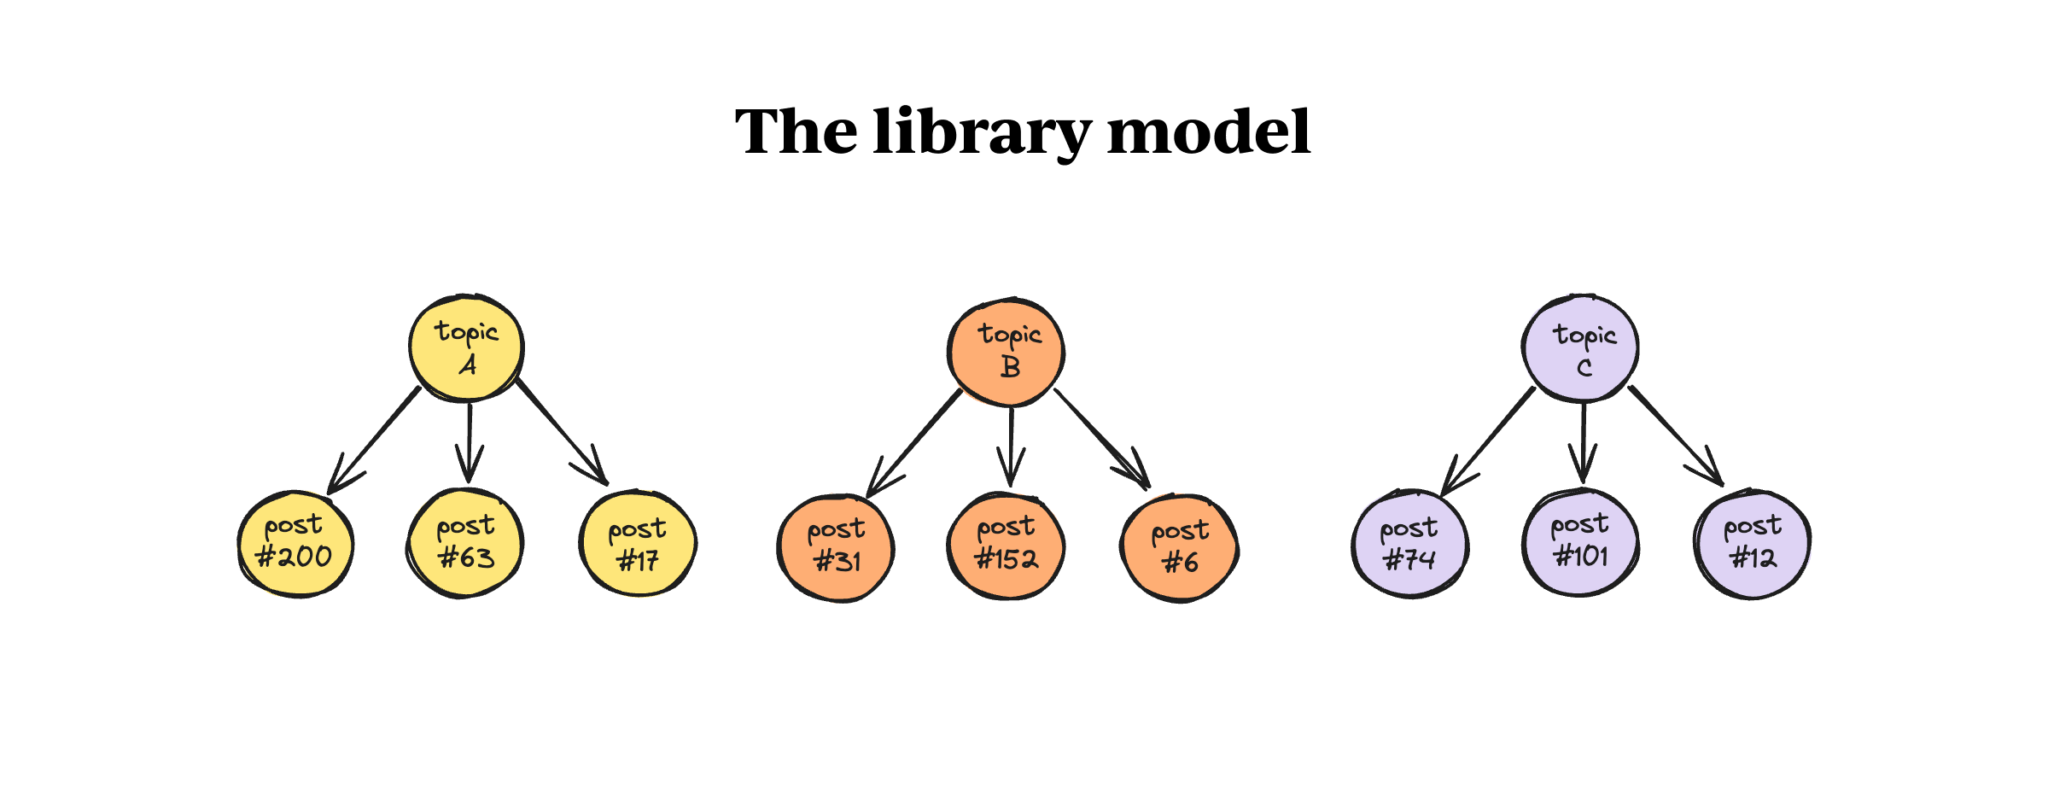 The Library model diagram